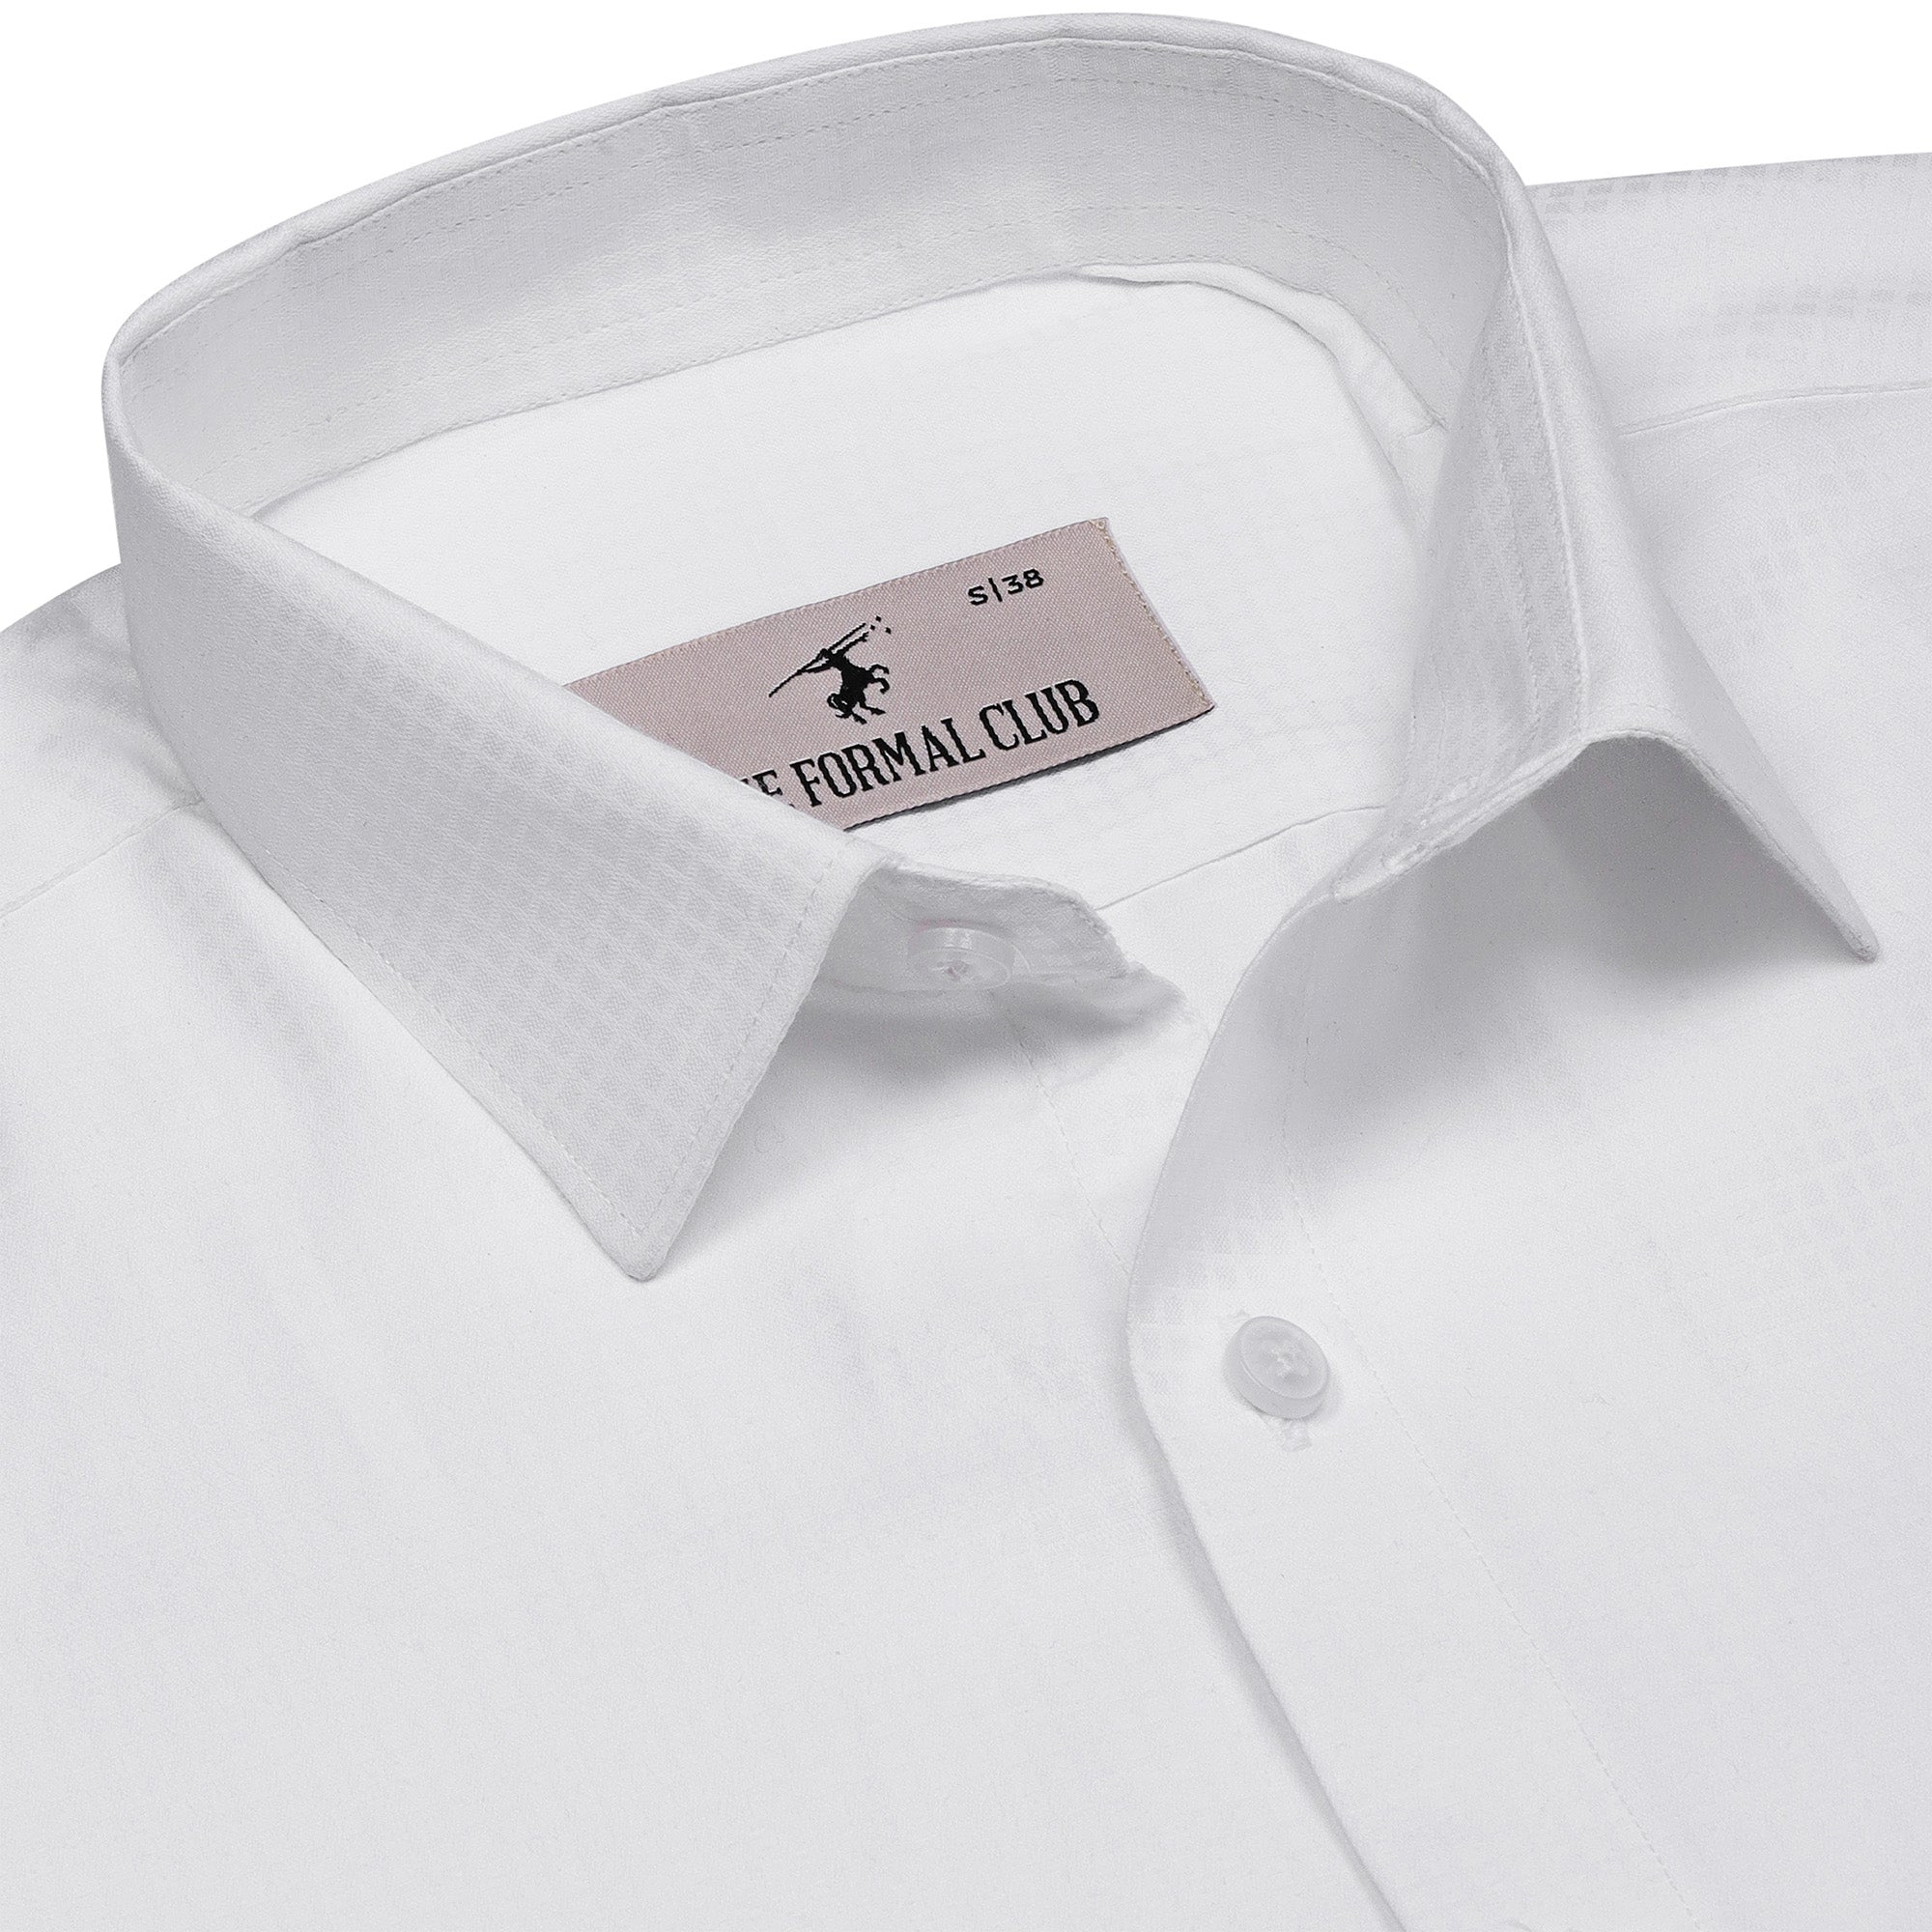 Harrier Dobby Textured Shirt in White - The Formal Club